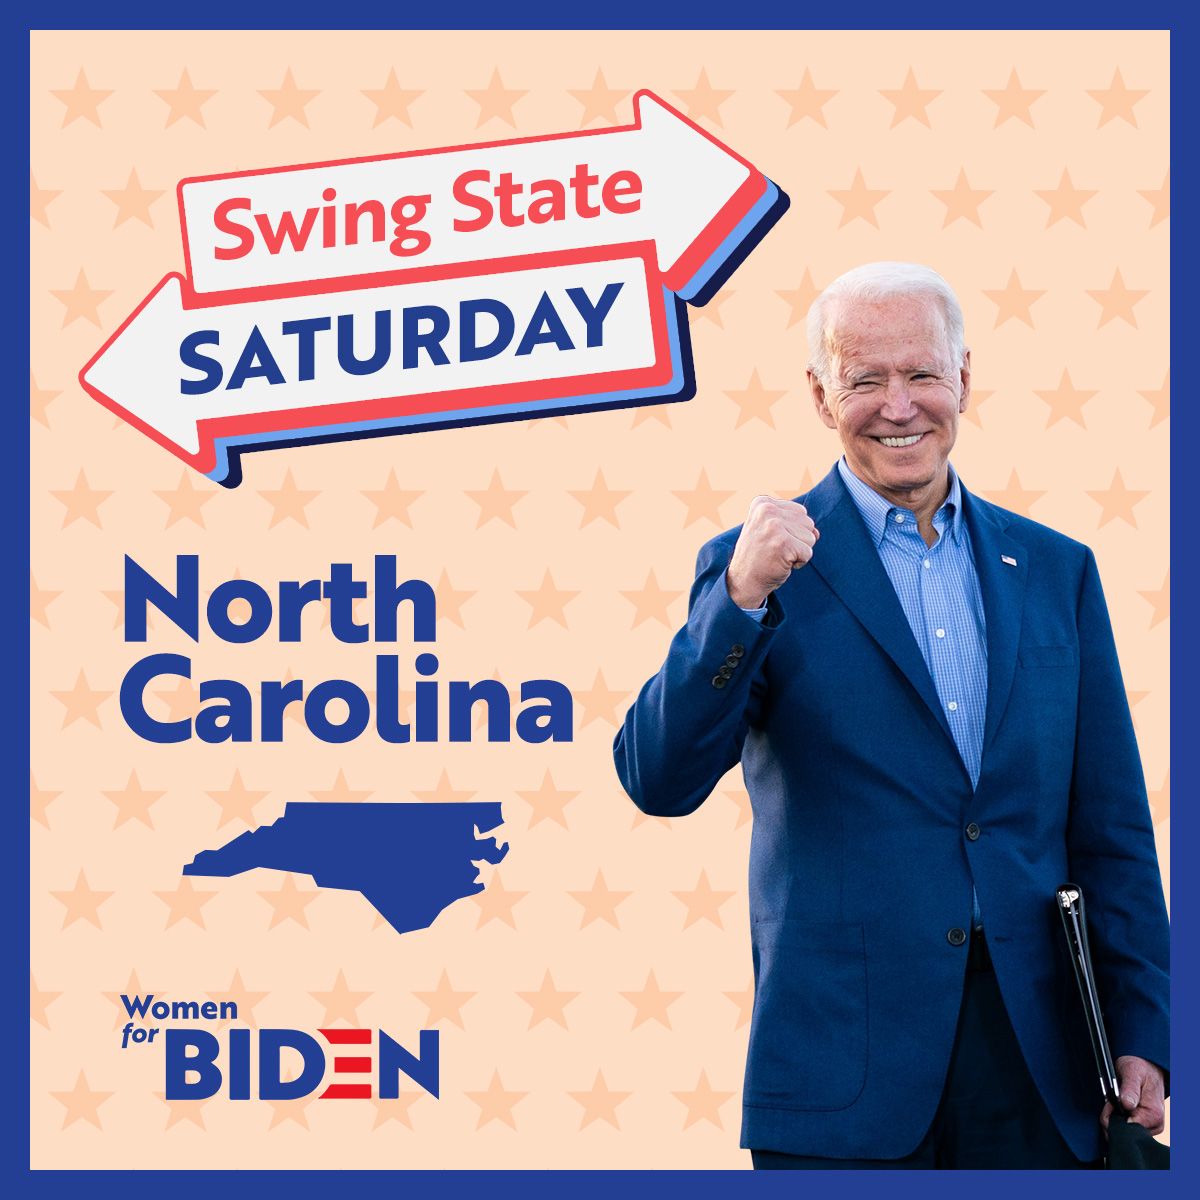 Today is #SwingStateSaturday and the state we are focusing on is North Carolina! There are lots of reasons you should be excited about NC this year. We will post voting info and info about key races. Also please follow @NCDemParty, let's make sure NC goes deep blue this year!!!!